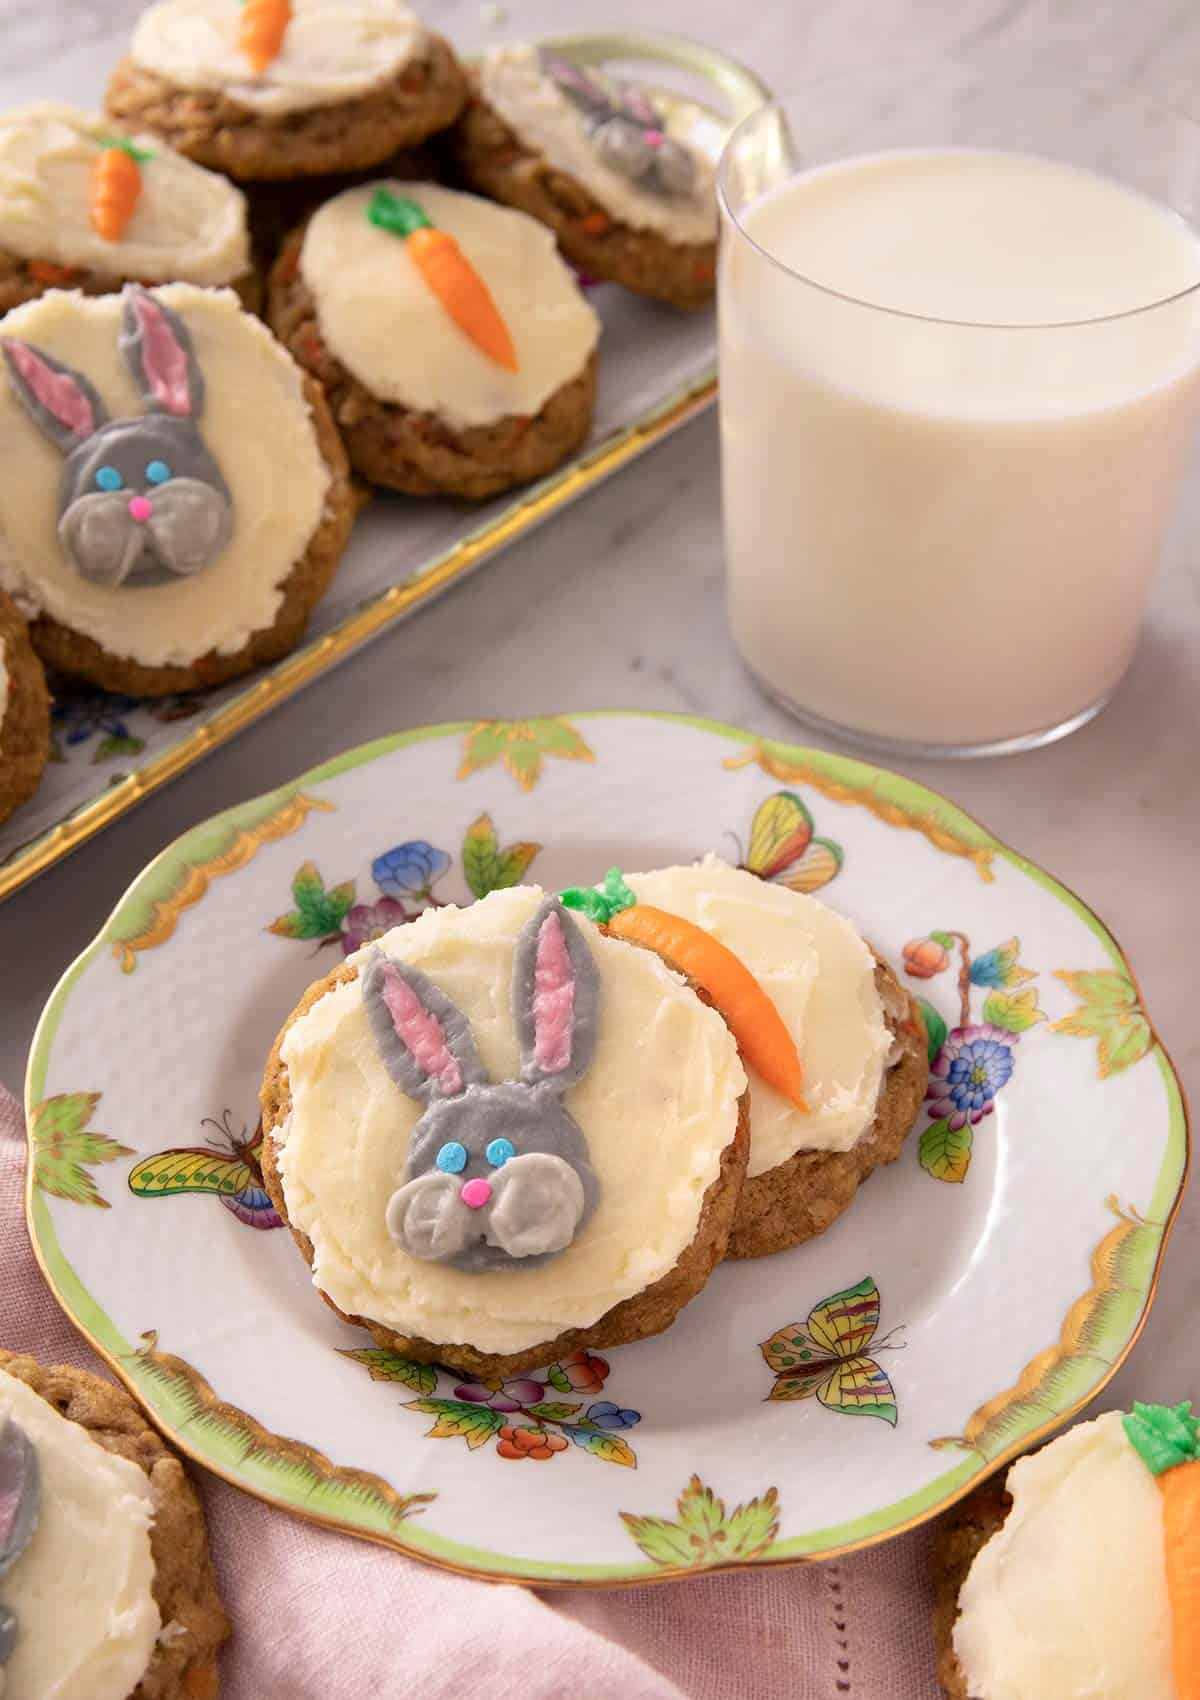 Carrot cake cookies on a plate with a glass of milk in the background